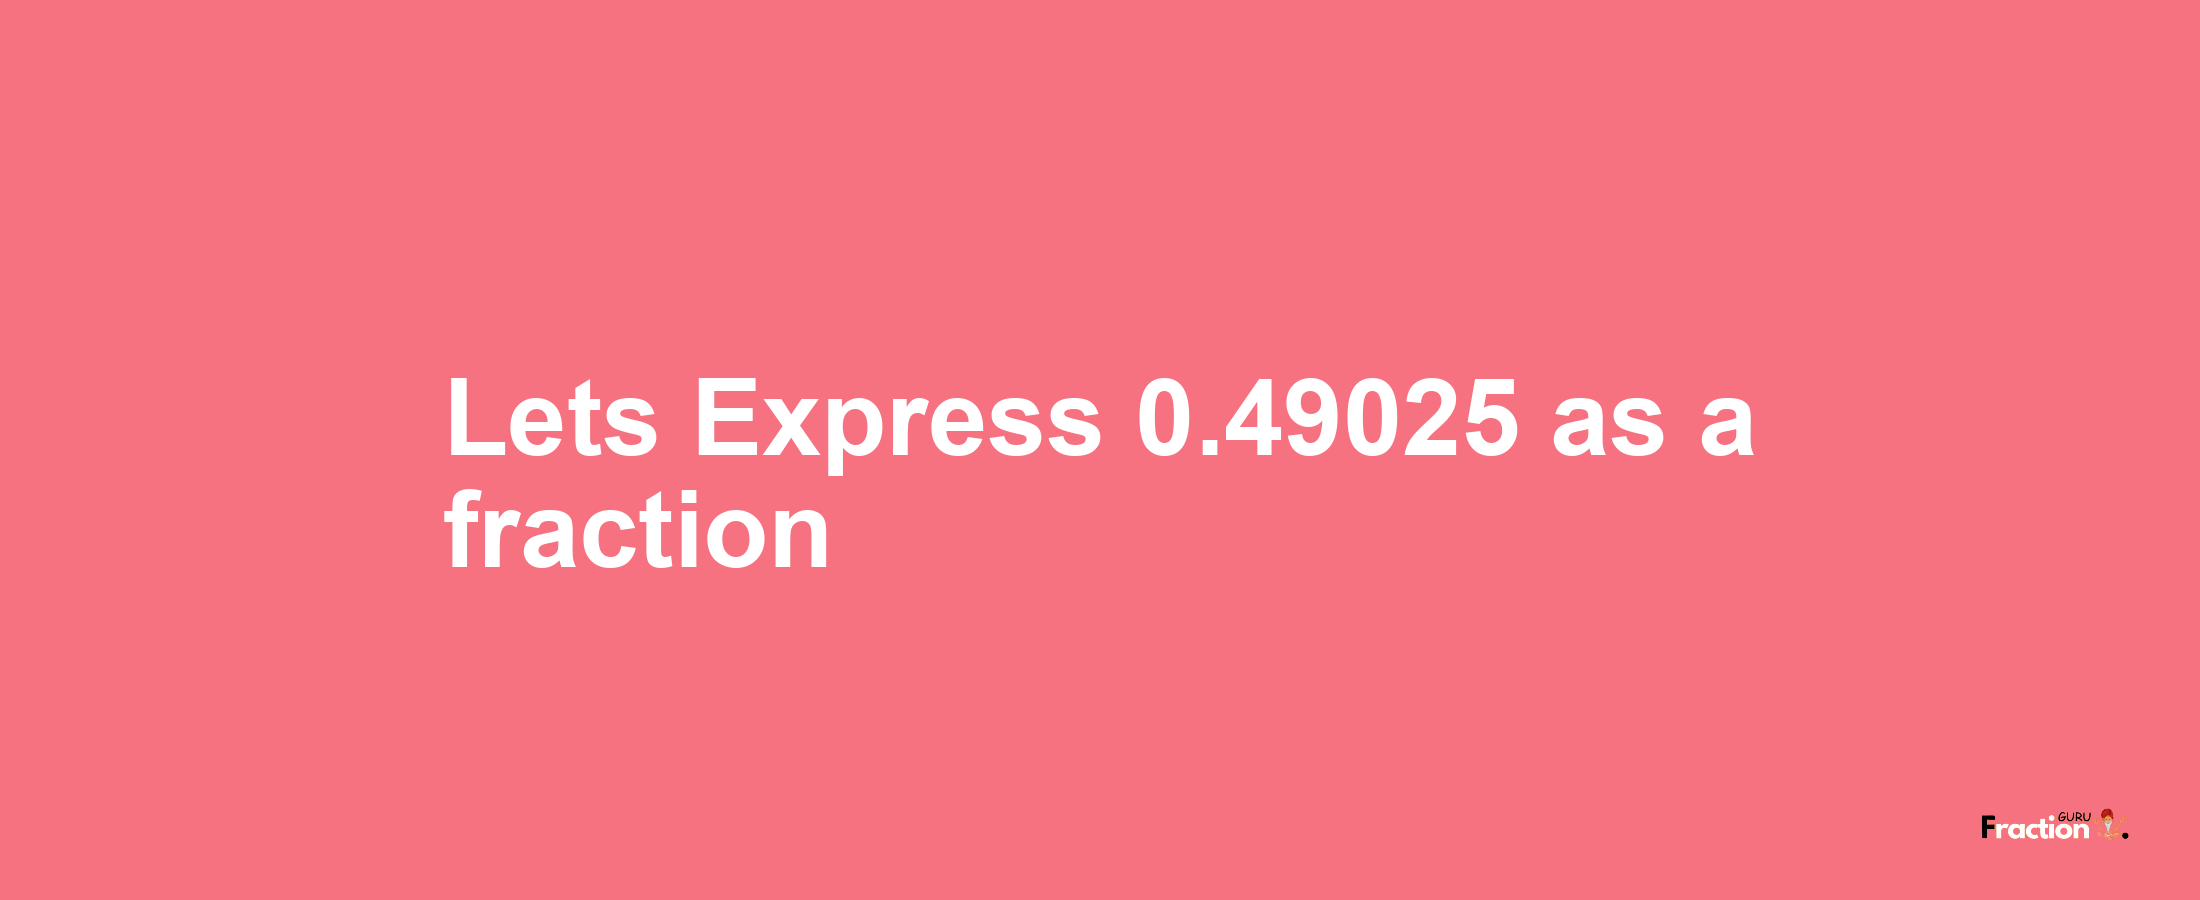 Lets Express 0.49025 as afraction